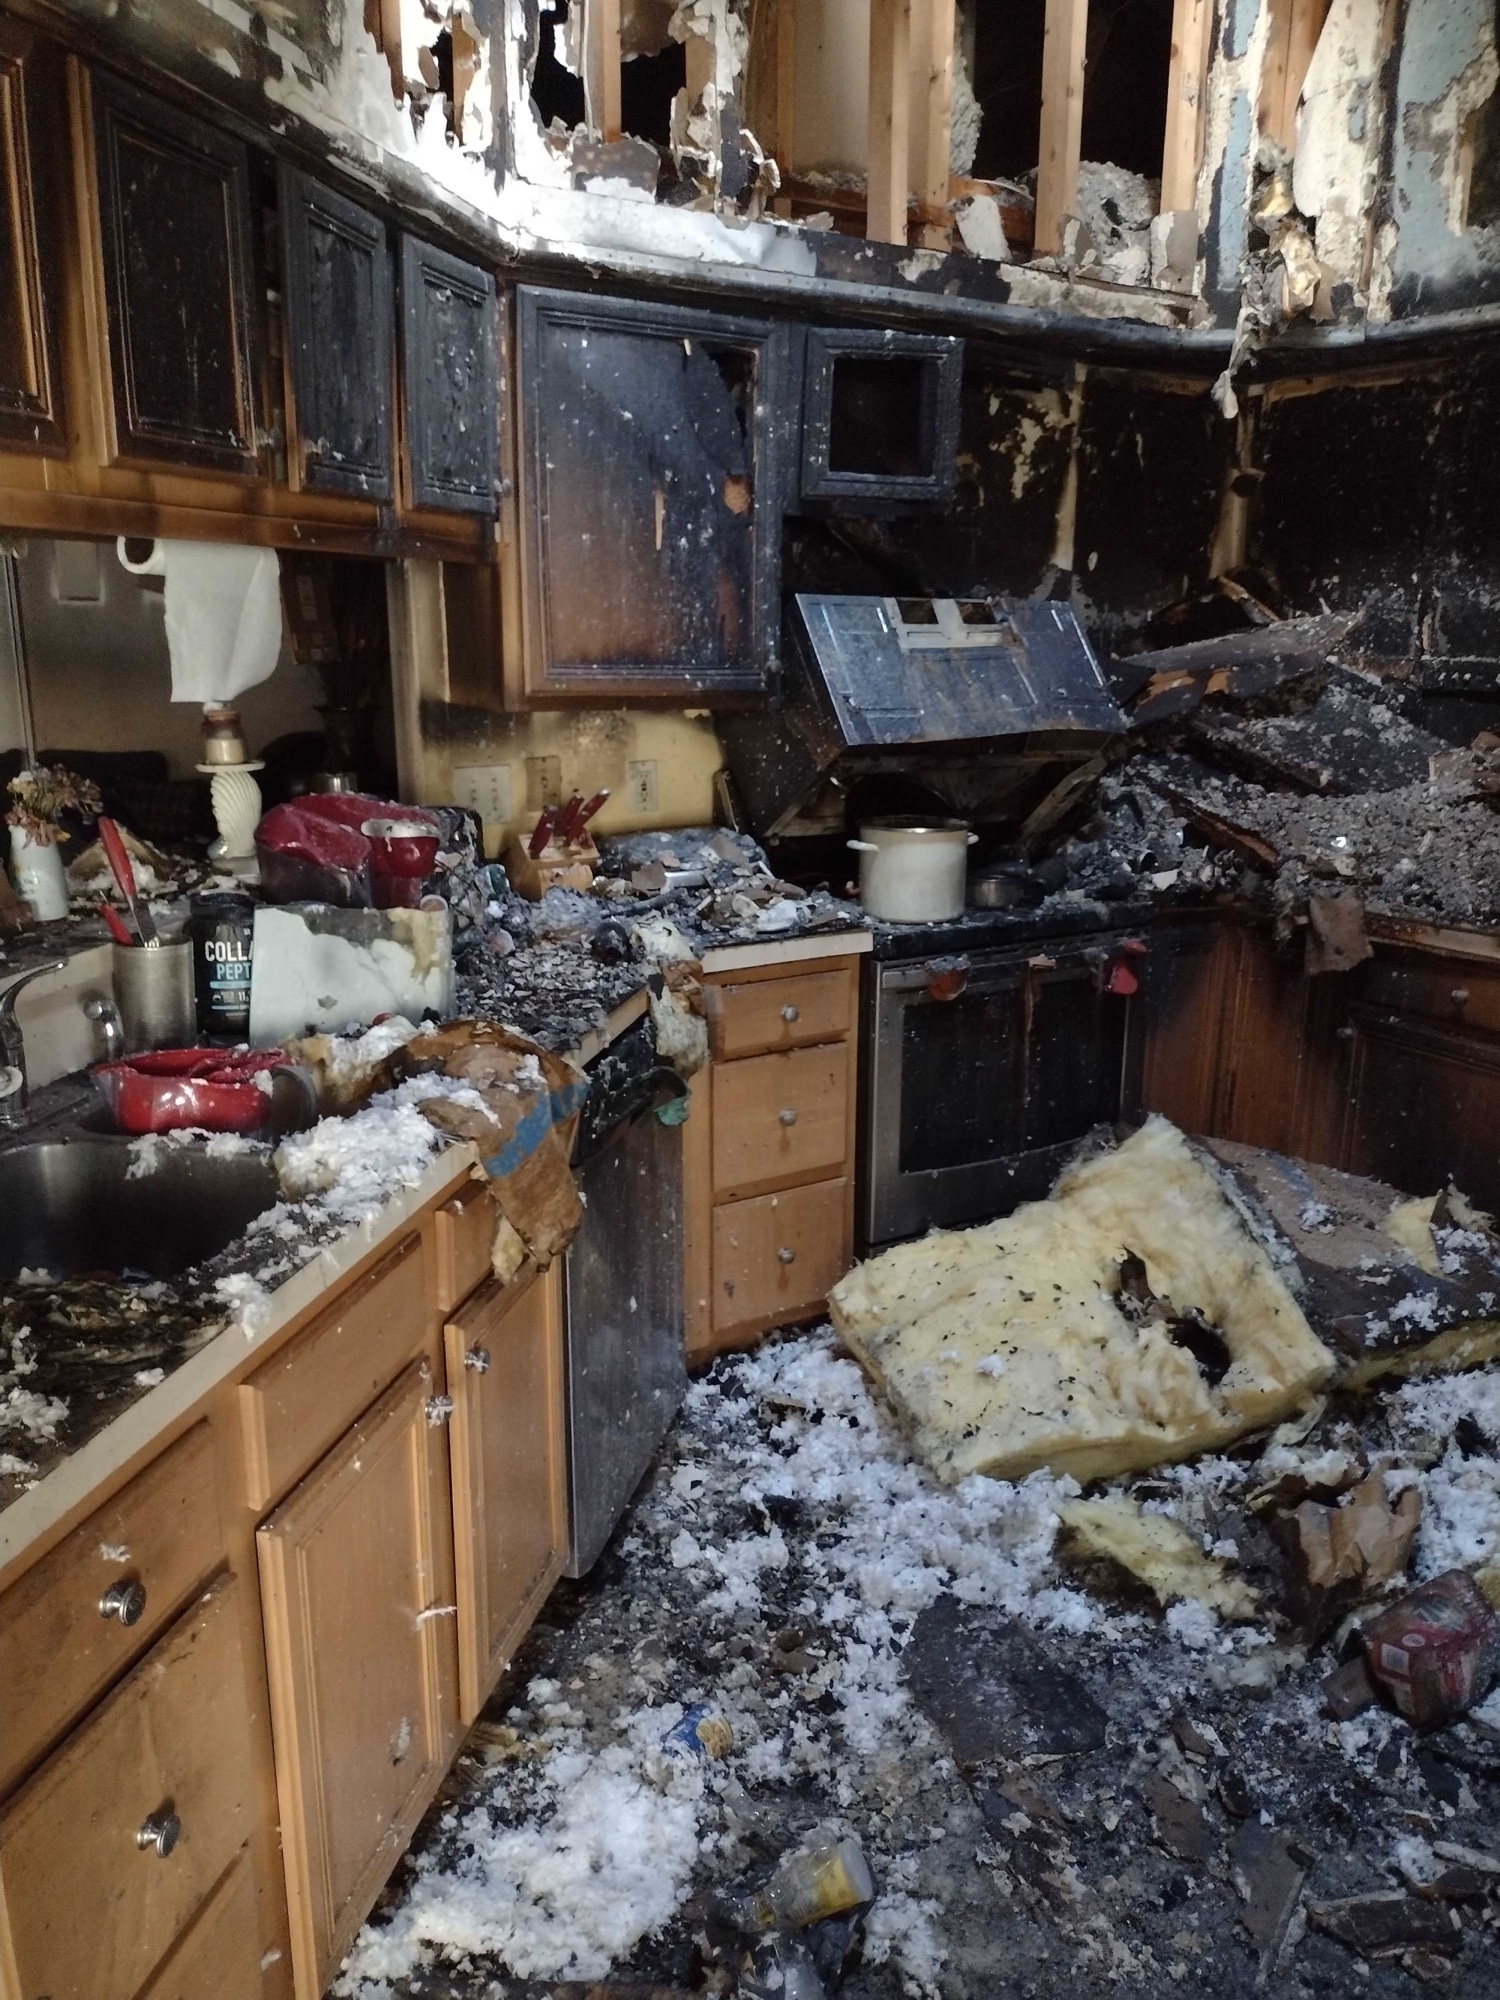 The house fire originated in the kitchen and spread to the living room.